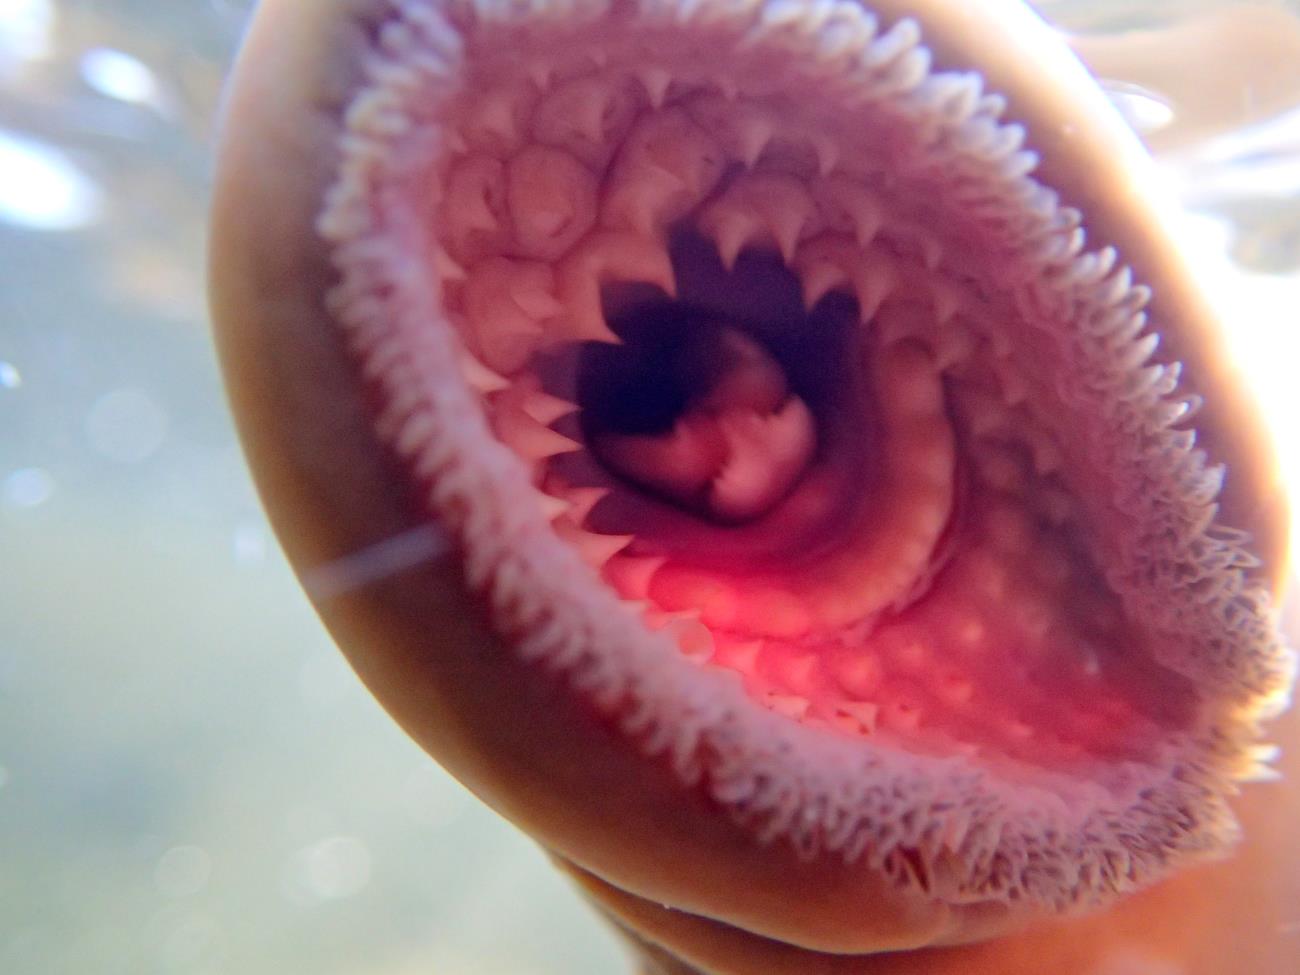 The mouth of a sea lamprey, an invasive species in the Great Lake. 